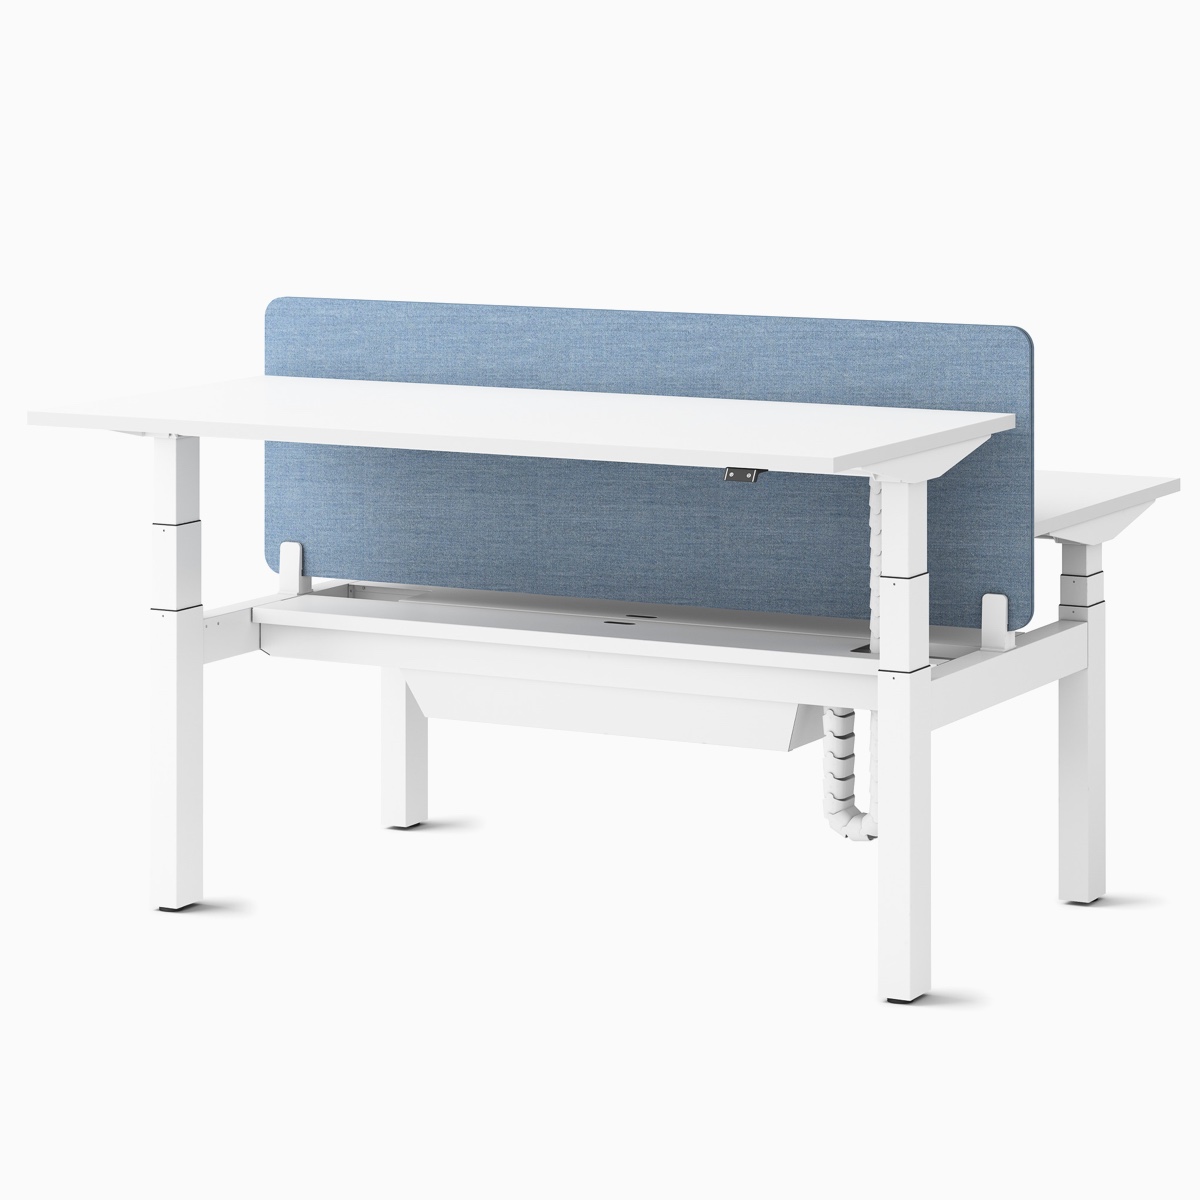 Two Ratio height-adjustable desks, positioned at seating and standing heights, back-to-back with a frameless, blue mounted privacy screen and an open-hinged cable tray.